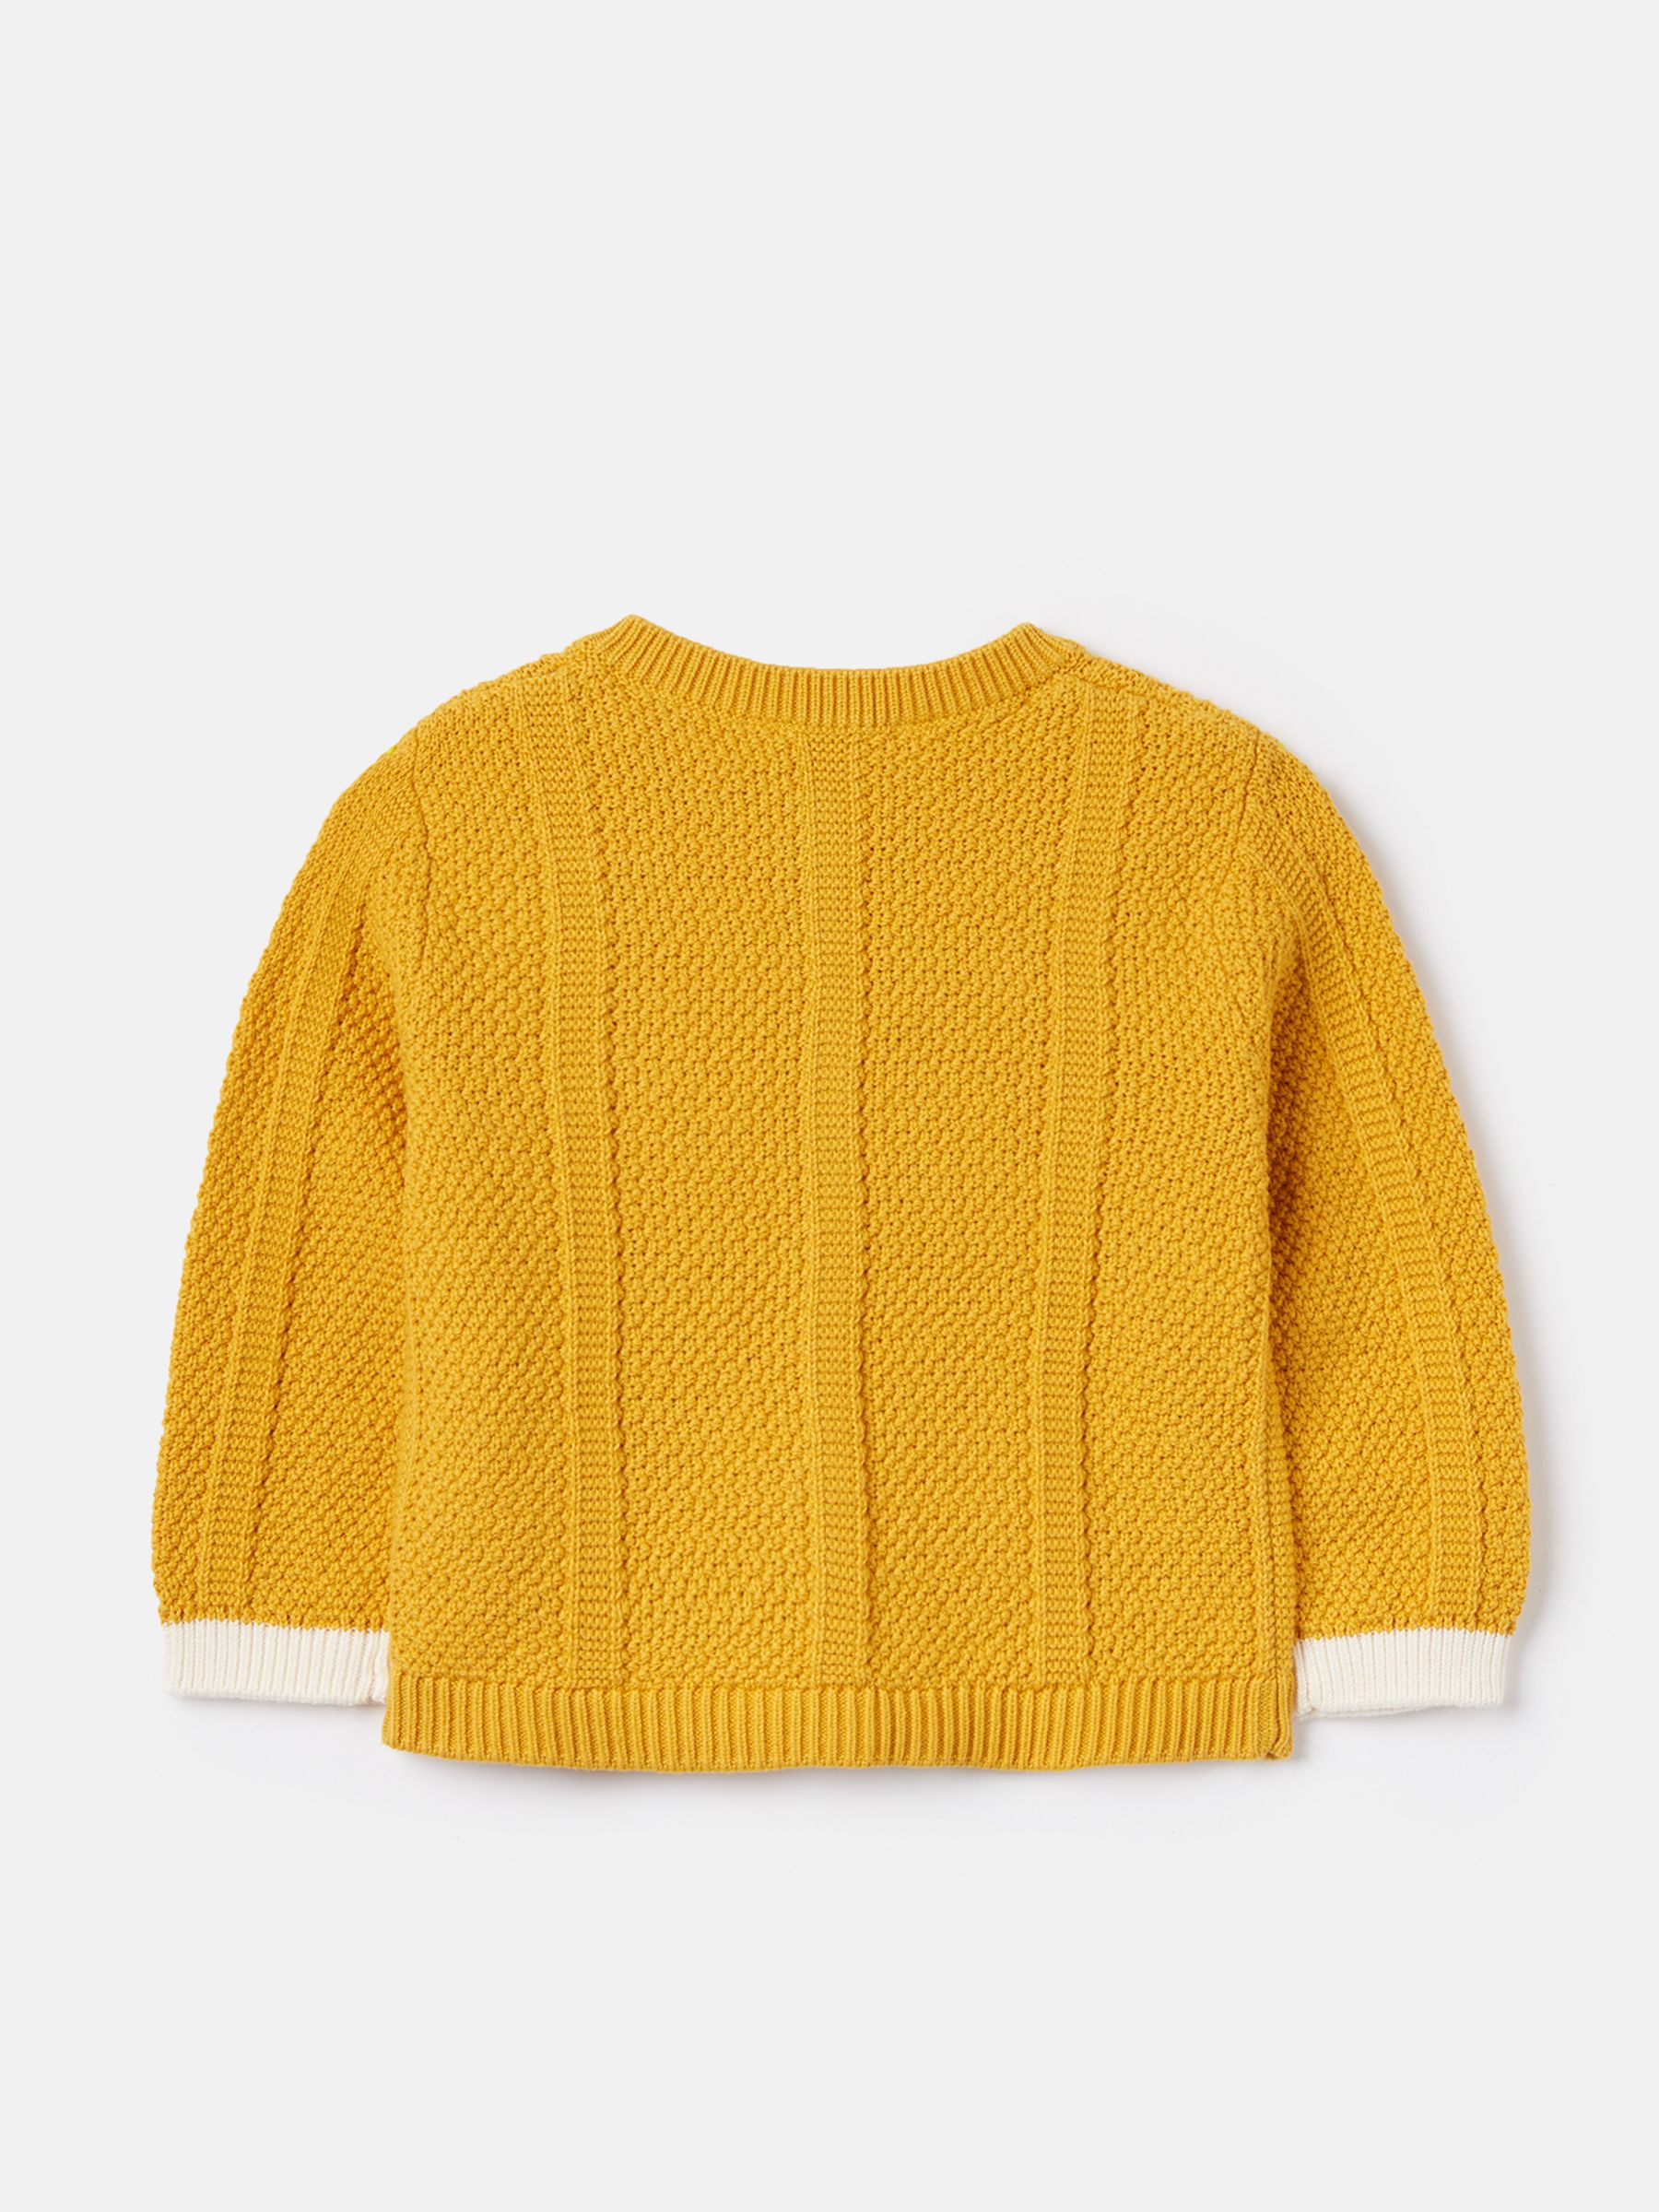 Buy Joules Farley Textured Knit Cardigan from the Joules online shop